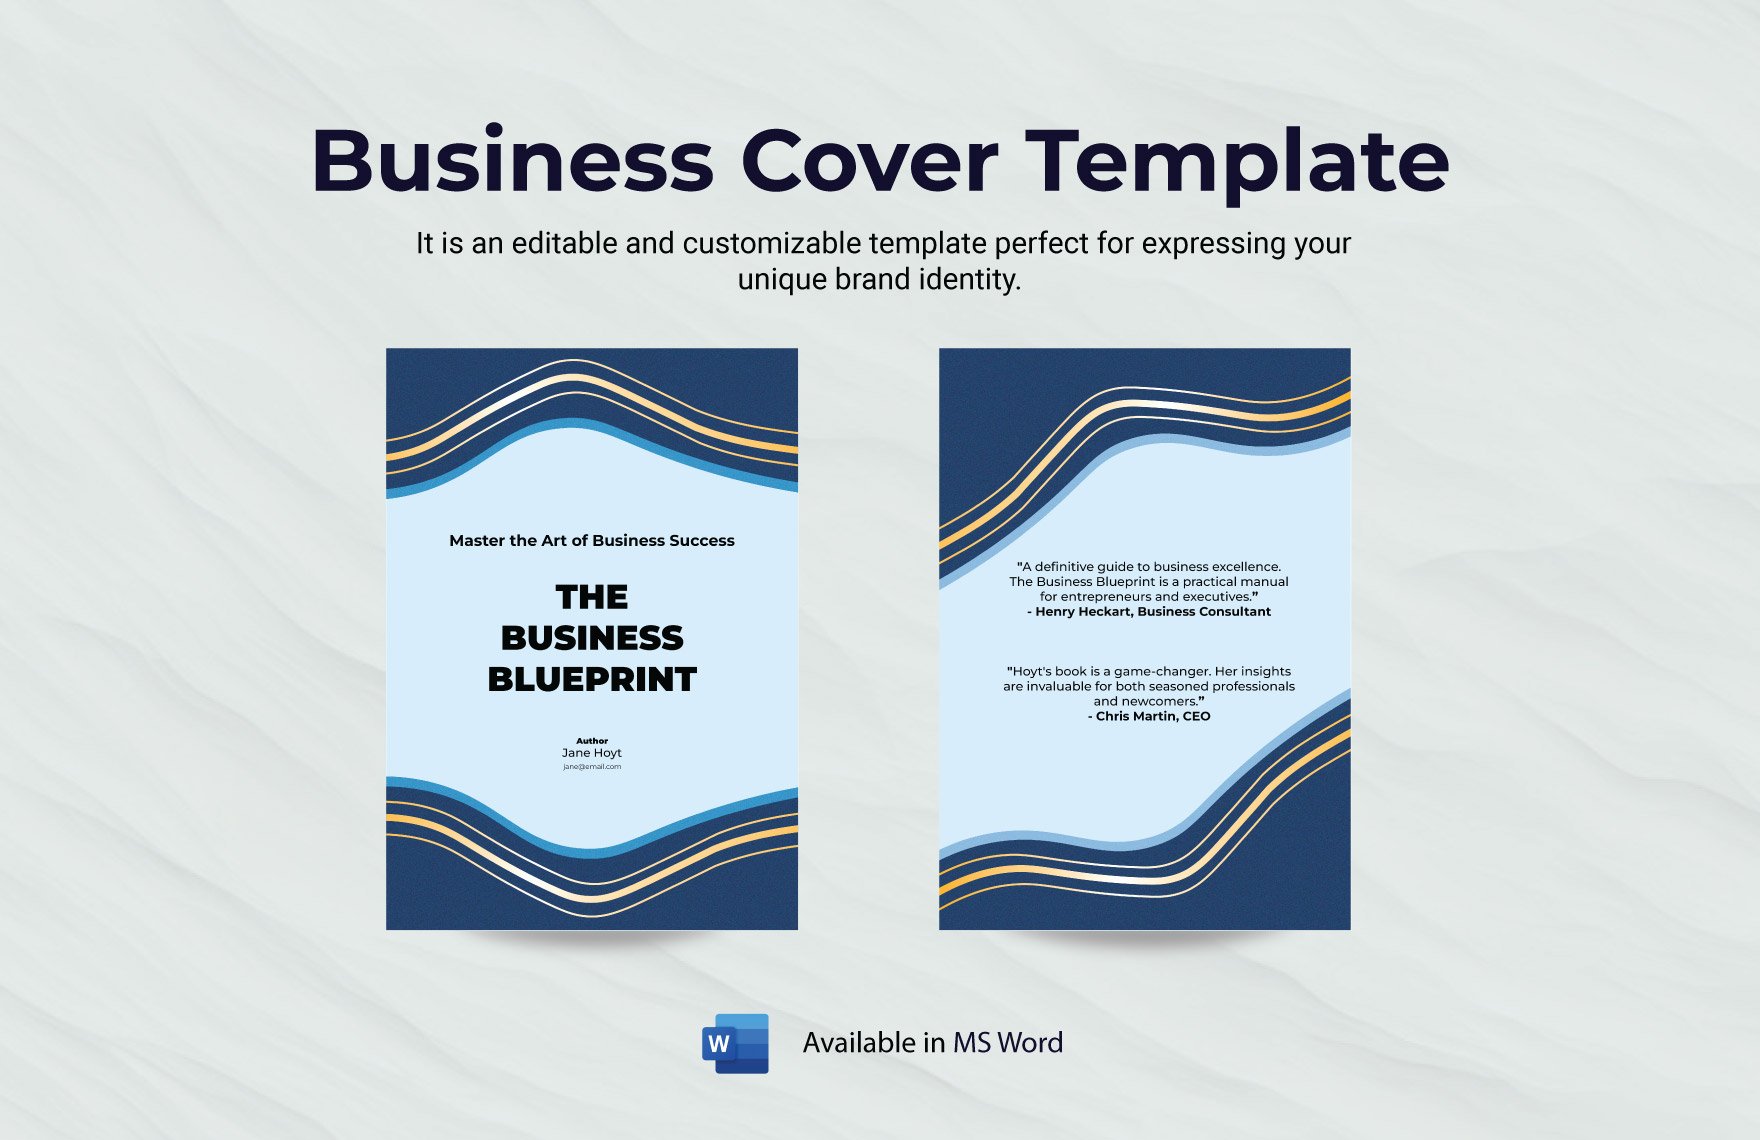 Business Cover Template in Word